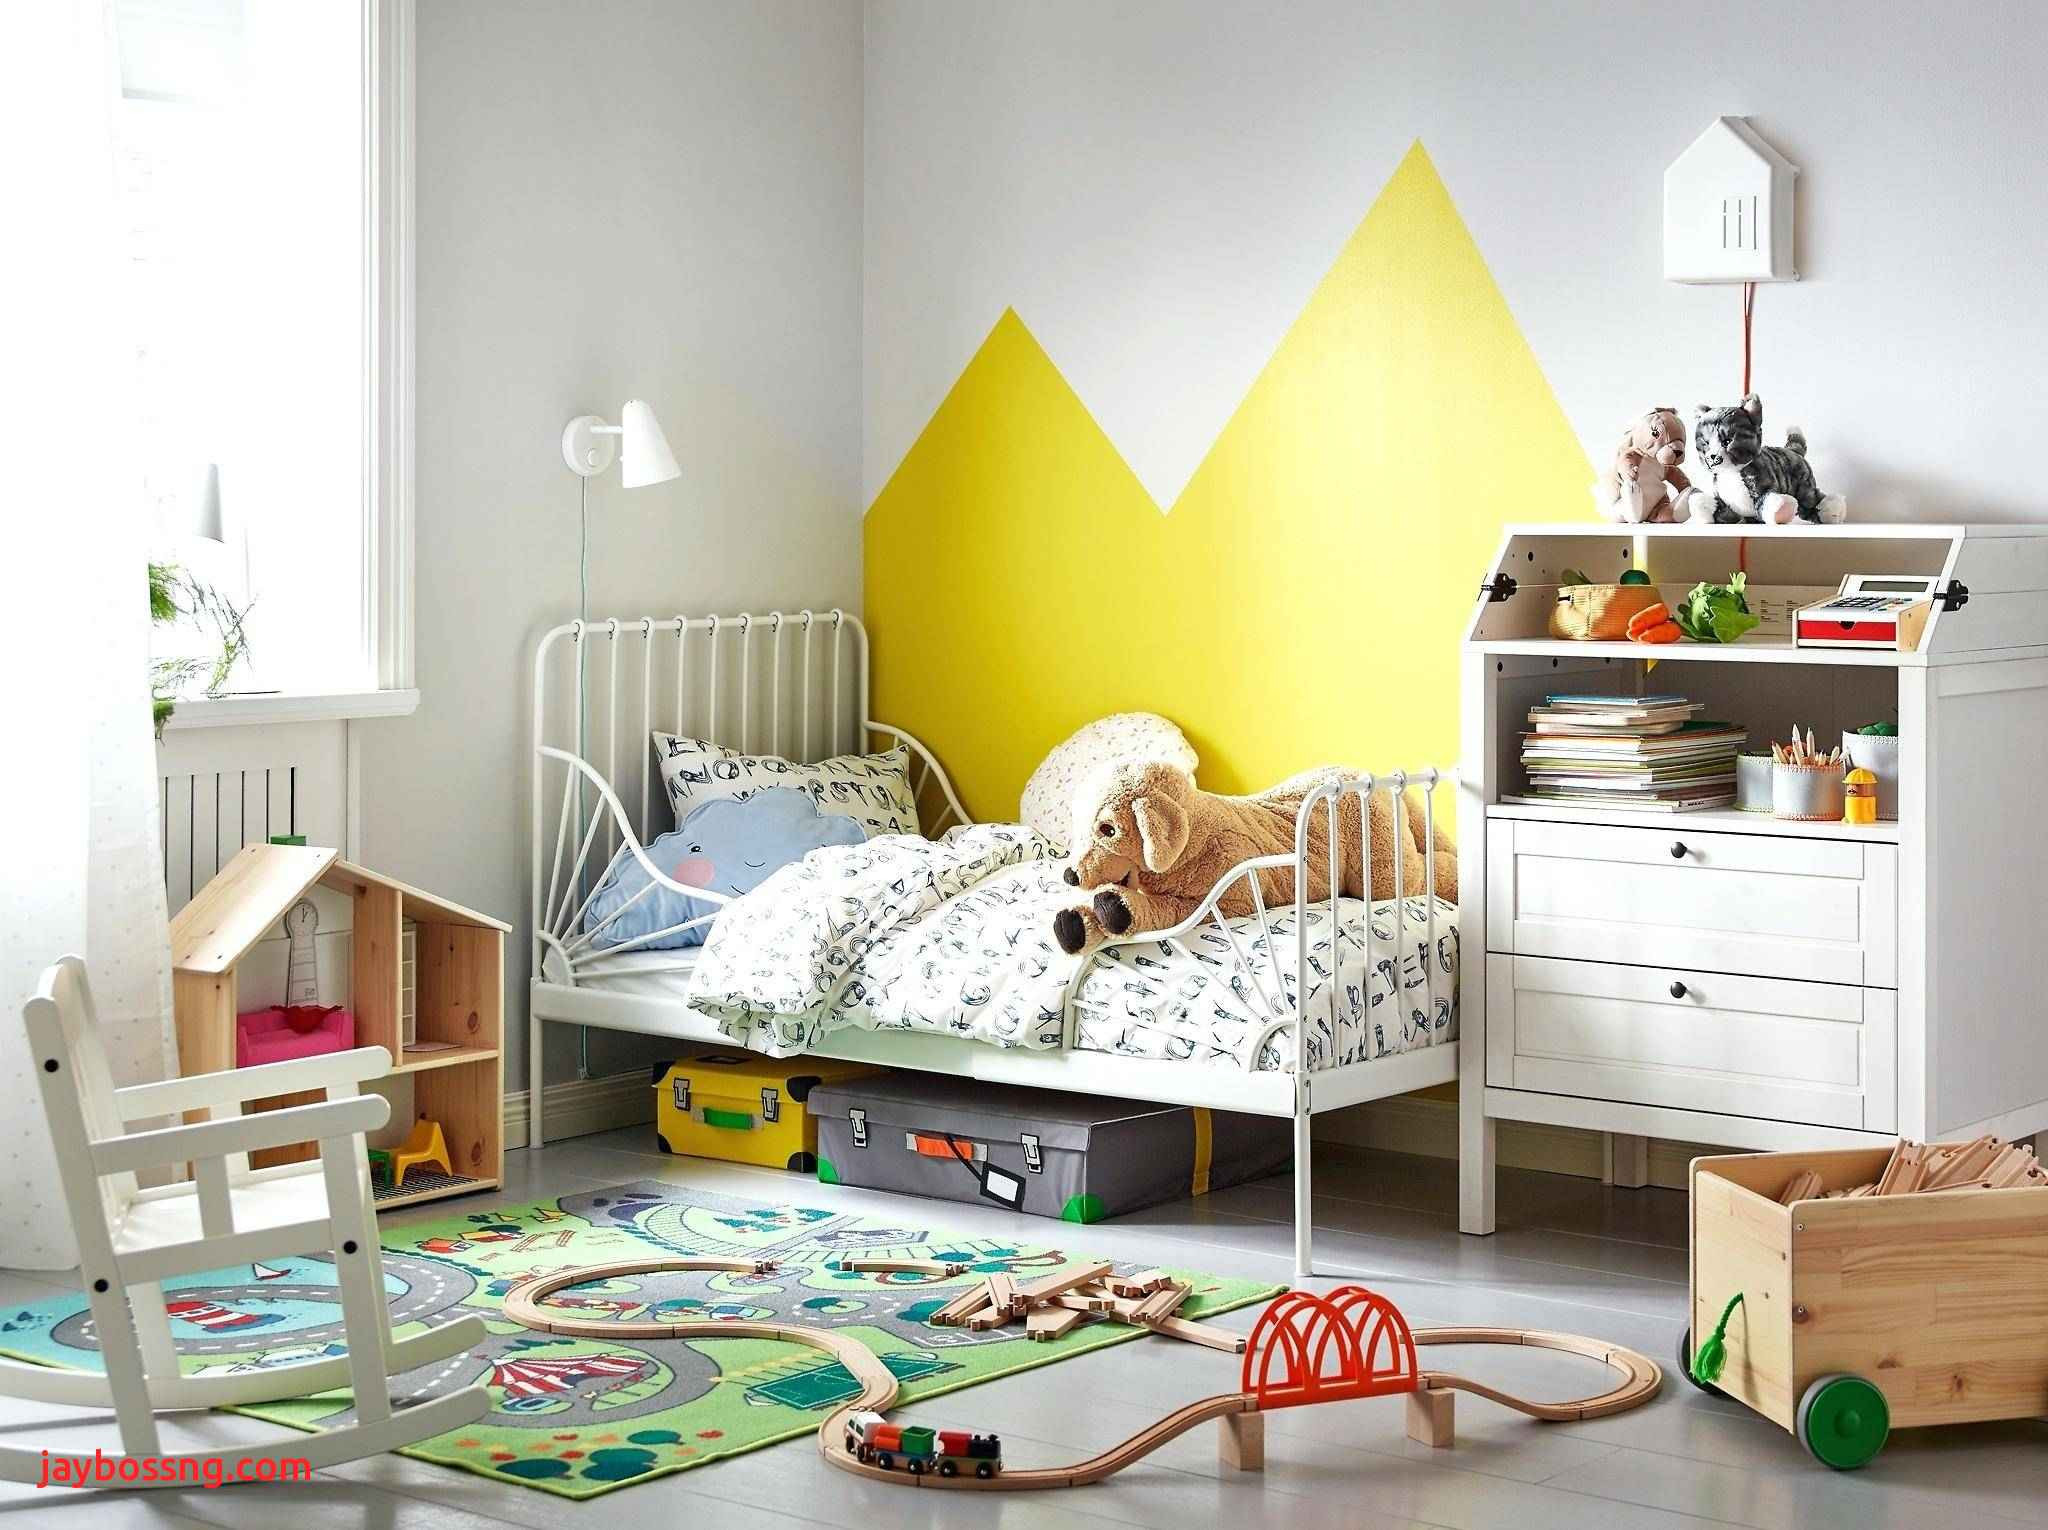 22 Lovable Yellow Vases Ikea 2022 free download yellow vases ikea of luxury wall desk ikea unique desk view throughout full size of bedroom ideas ikea kids rooms awesome wall bookshelf 0d tags fabulous wall